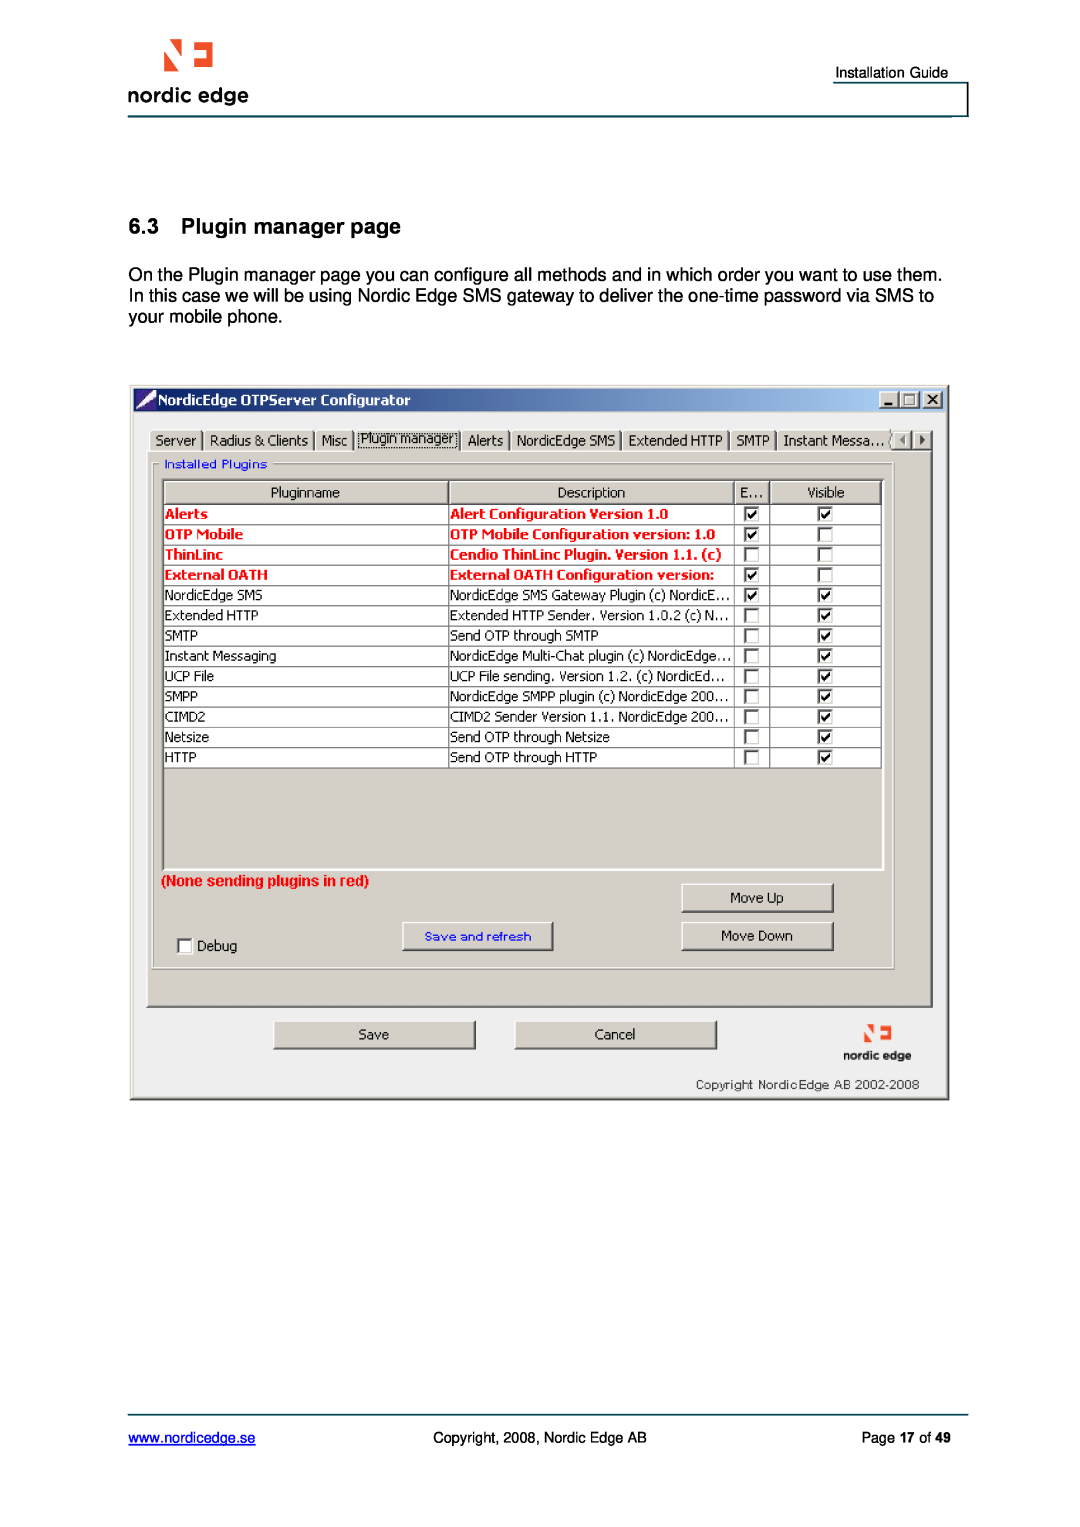 Cisco Systems ASA 5500 manual 6.3Plugin manager page, Installation Guide, Copyright, 2008, Nordic Edge AB, Page 17 of 